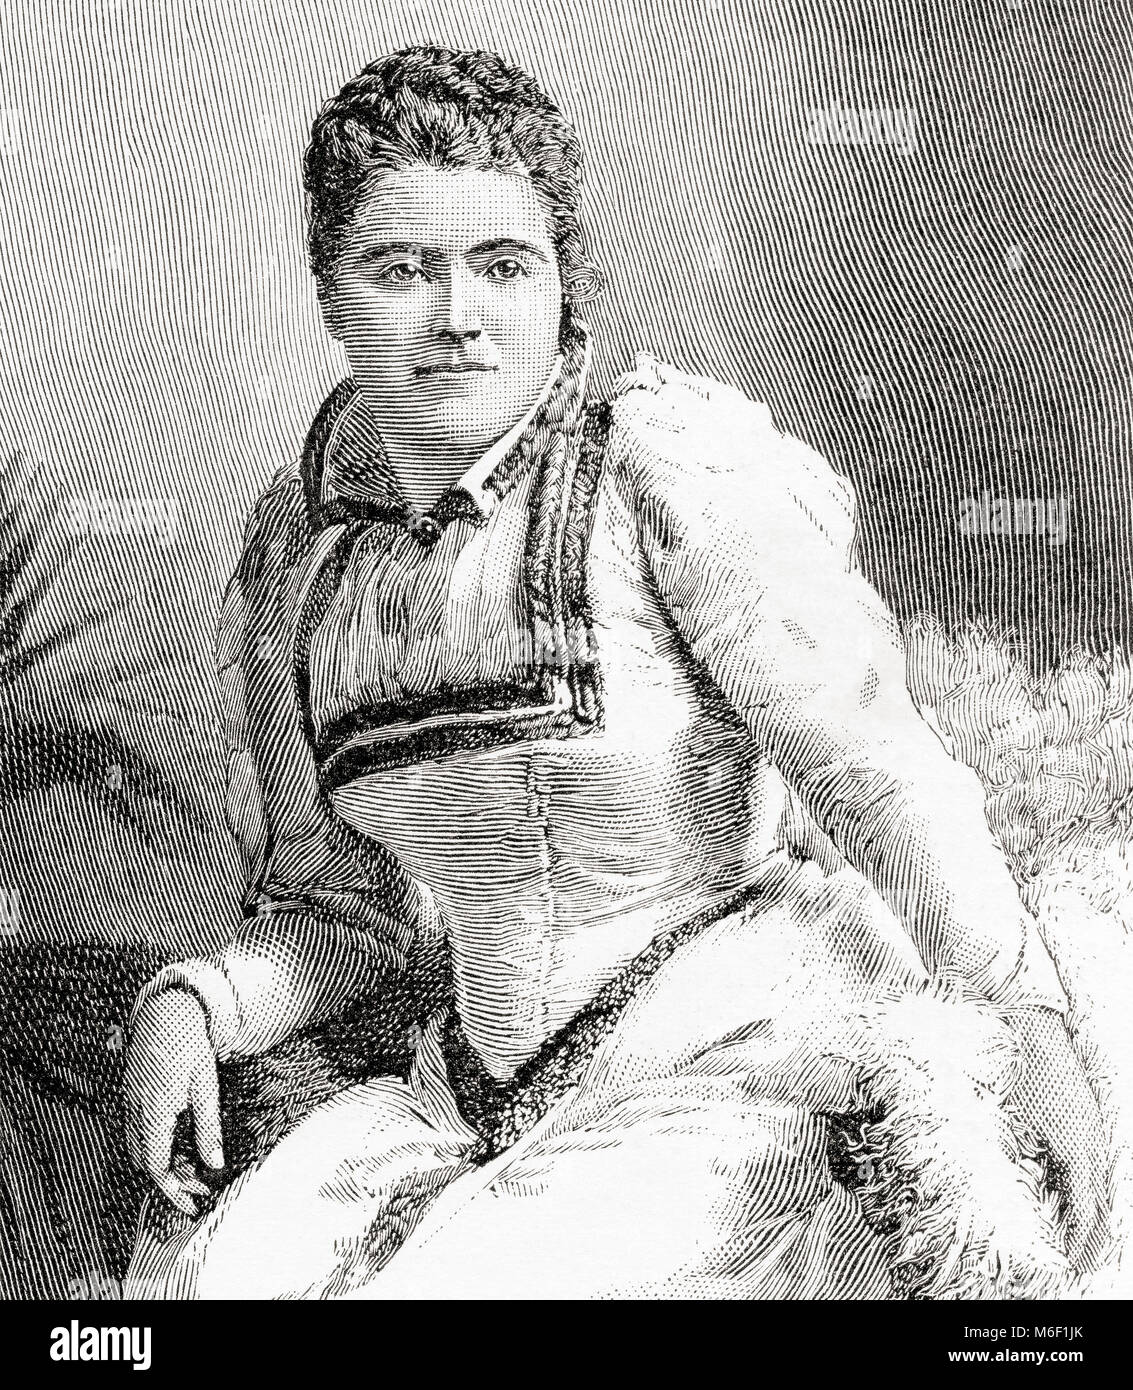 Emilia Francis, Lady Dilke, née Strong, 1840 - 1904.  English author, art historian, feminist and trade unionist.  From The Strand Magazine, published January to June, 1894. Stock Photo